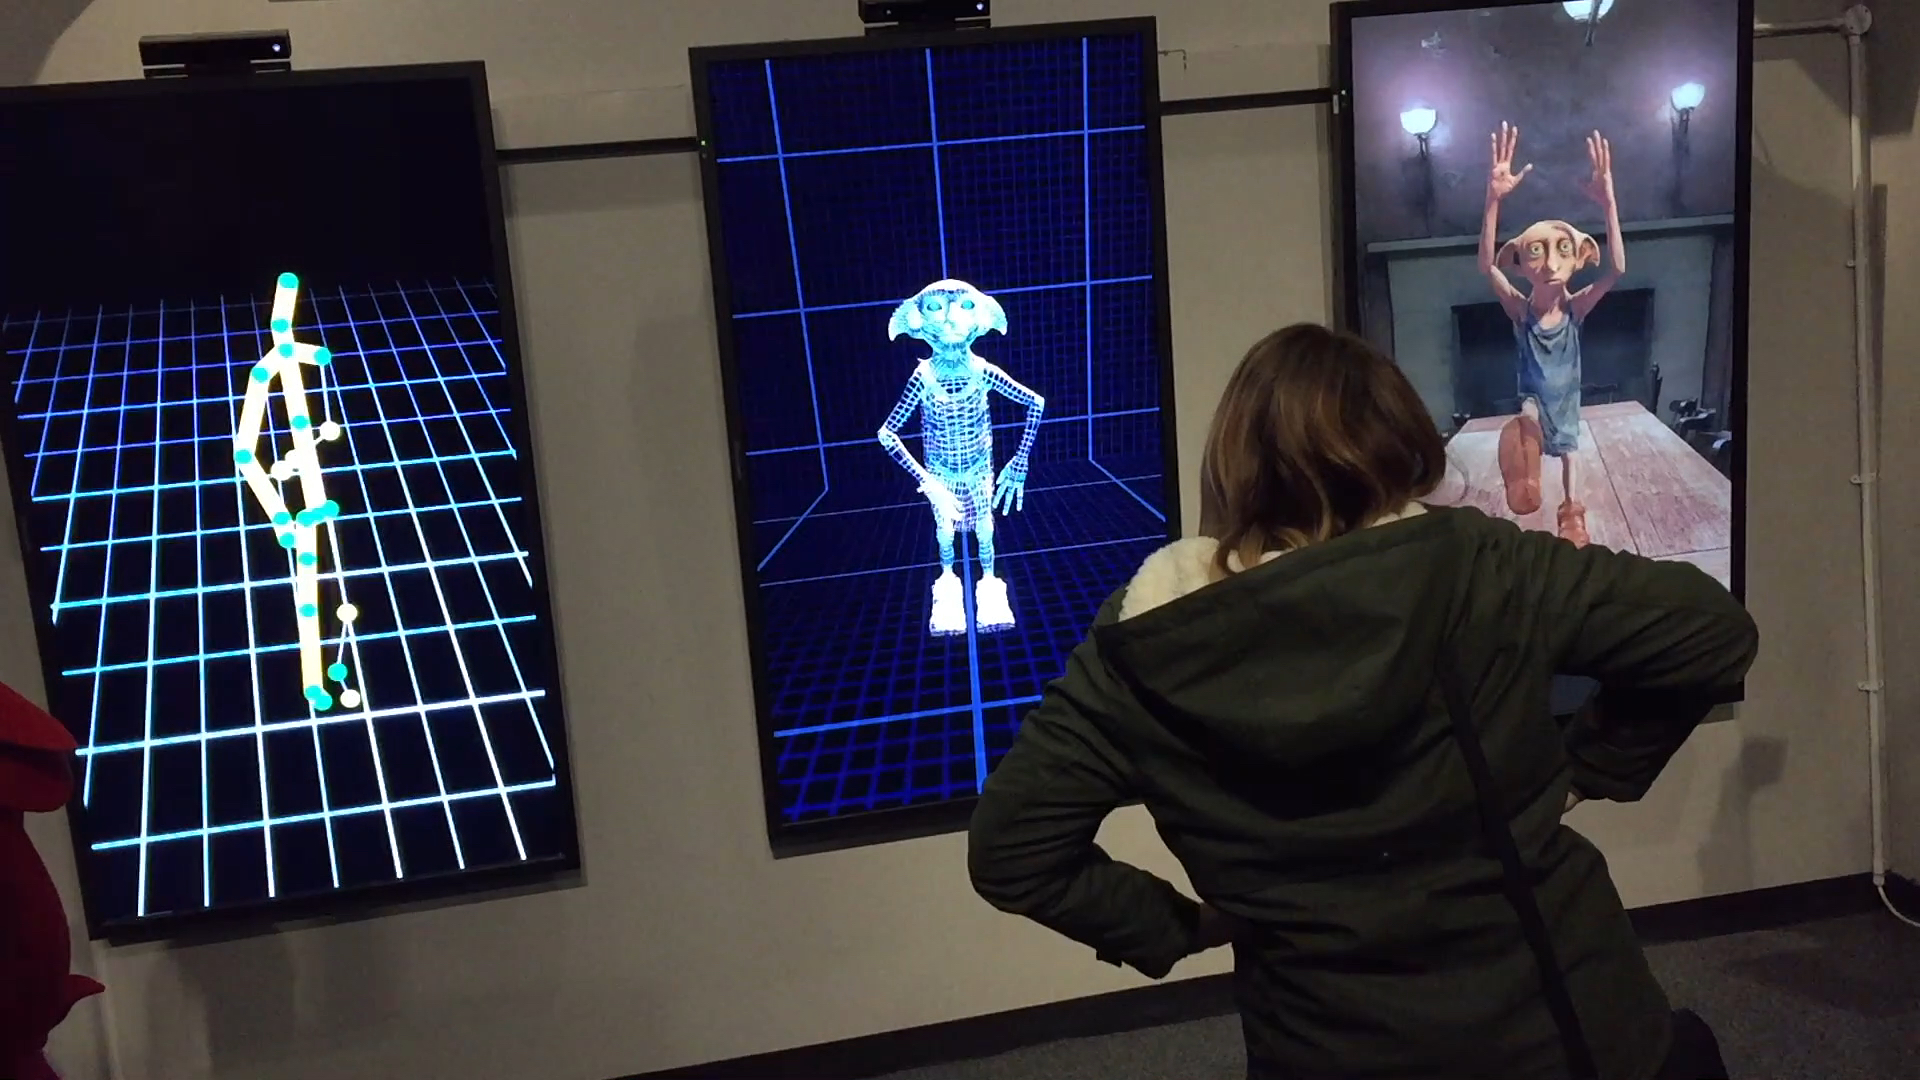 3 vertical screens - one showing a stick figure, one showing a skeleton of Dobby, and one showing a fully rendered version of Dobby. In each case, the animation on the screen is matching the movements of the people standing in front of it.